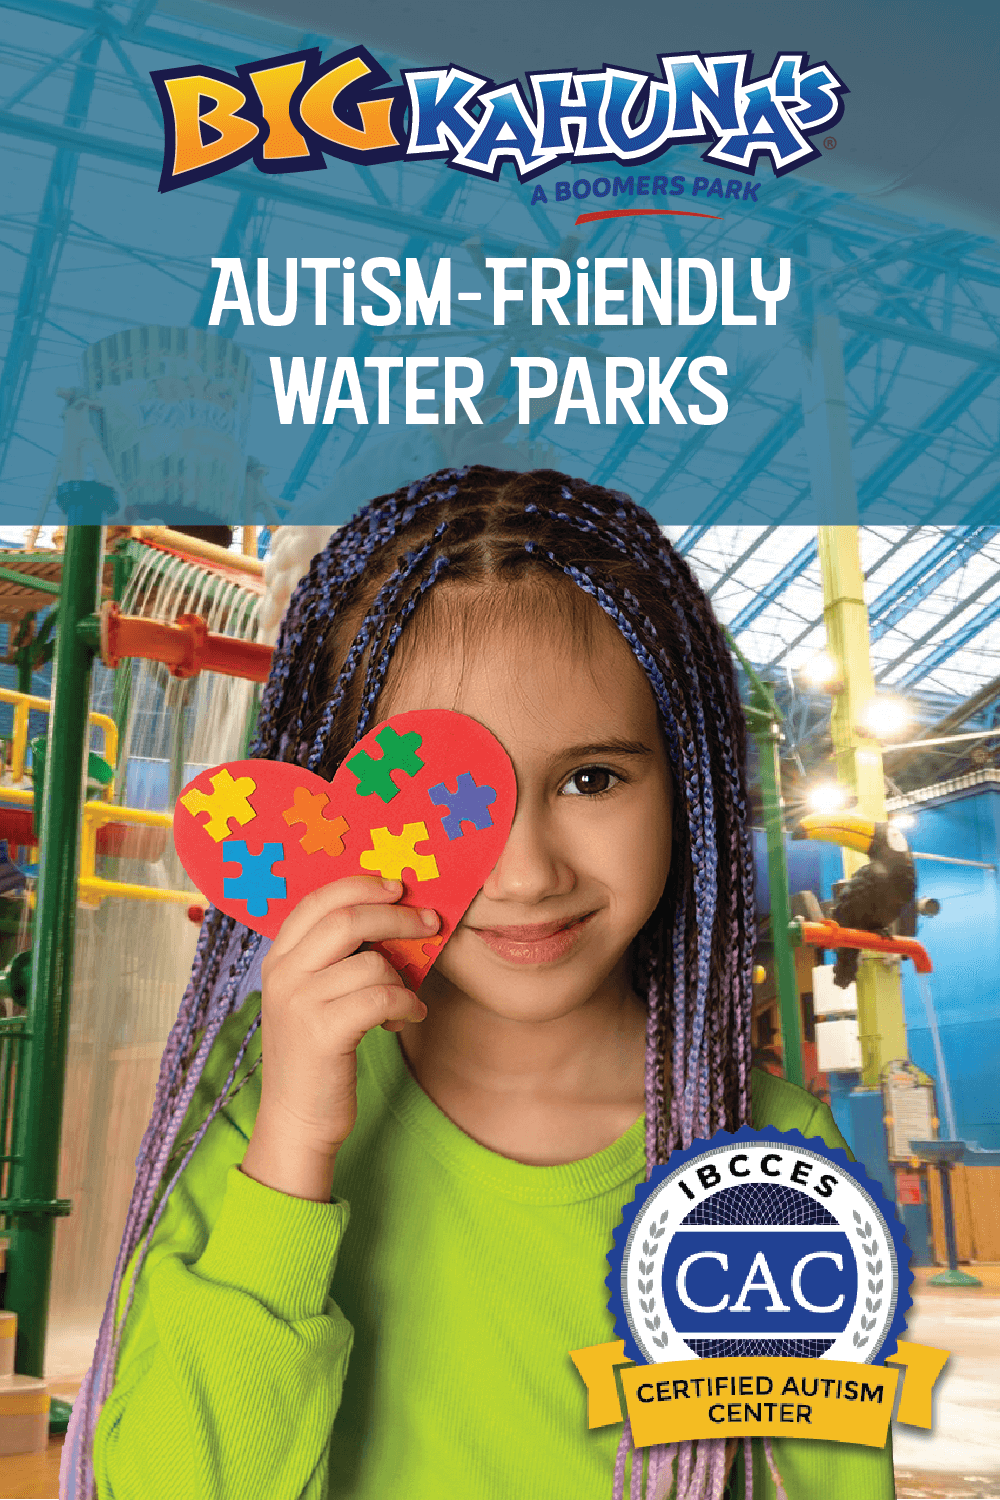 Big Kahuna's Water Park is a Certified Autism Center